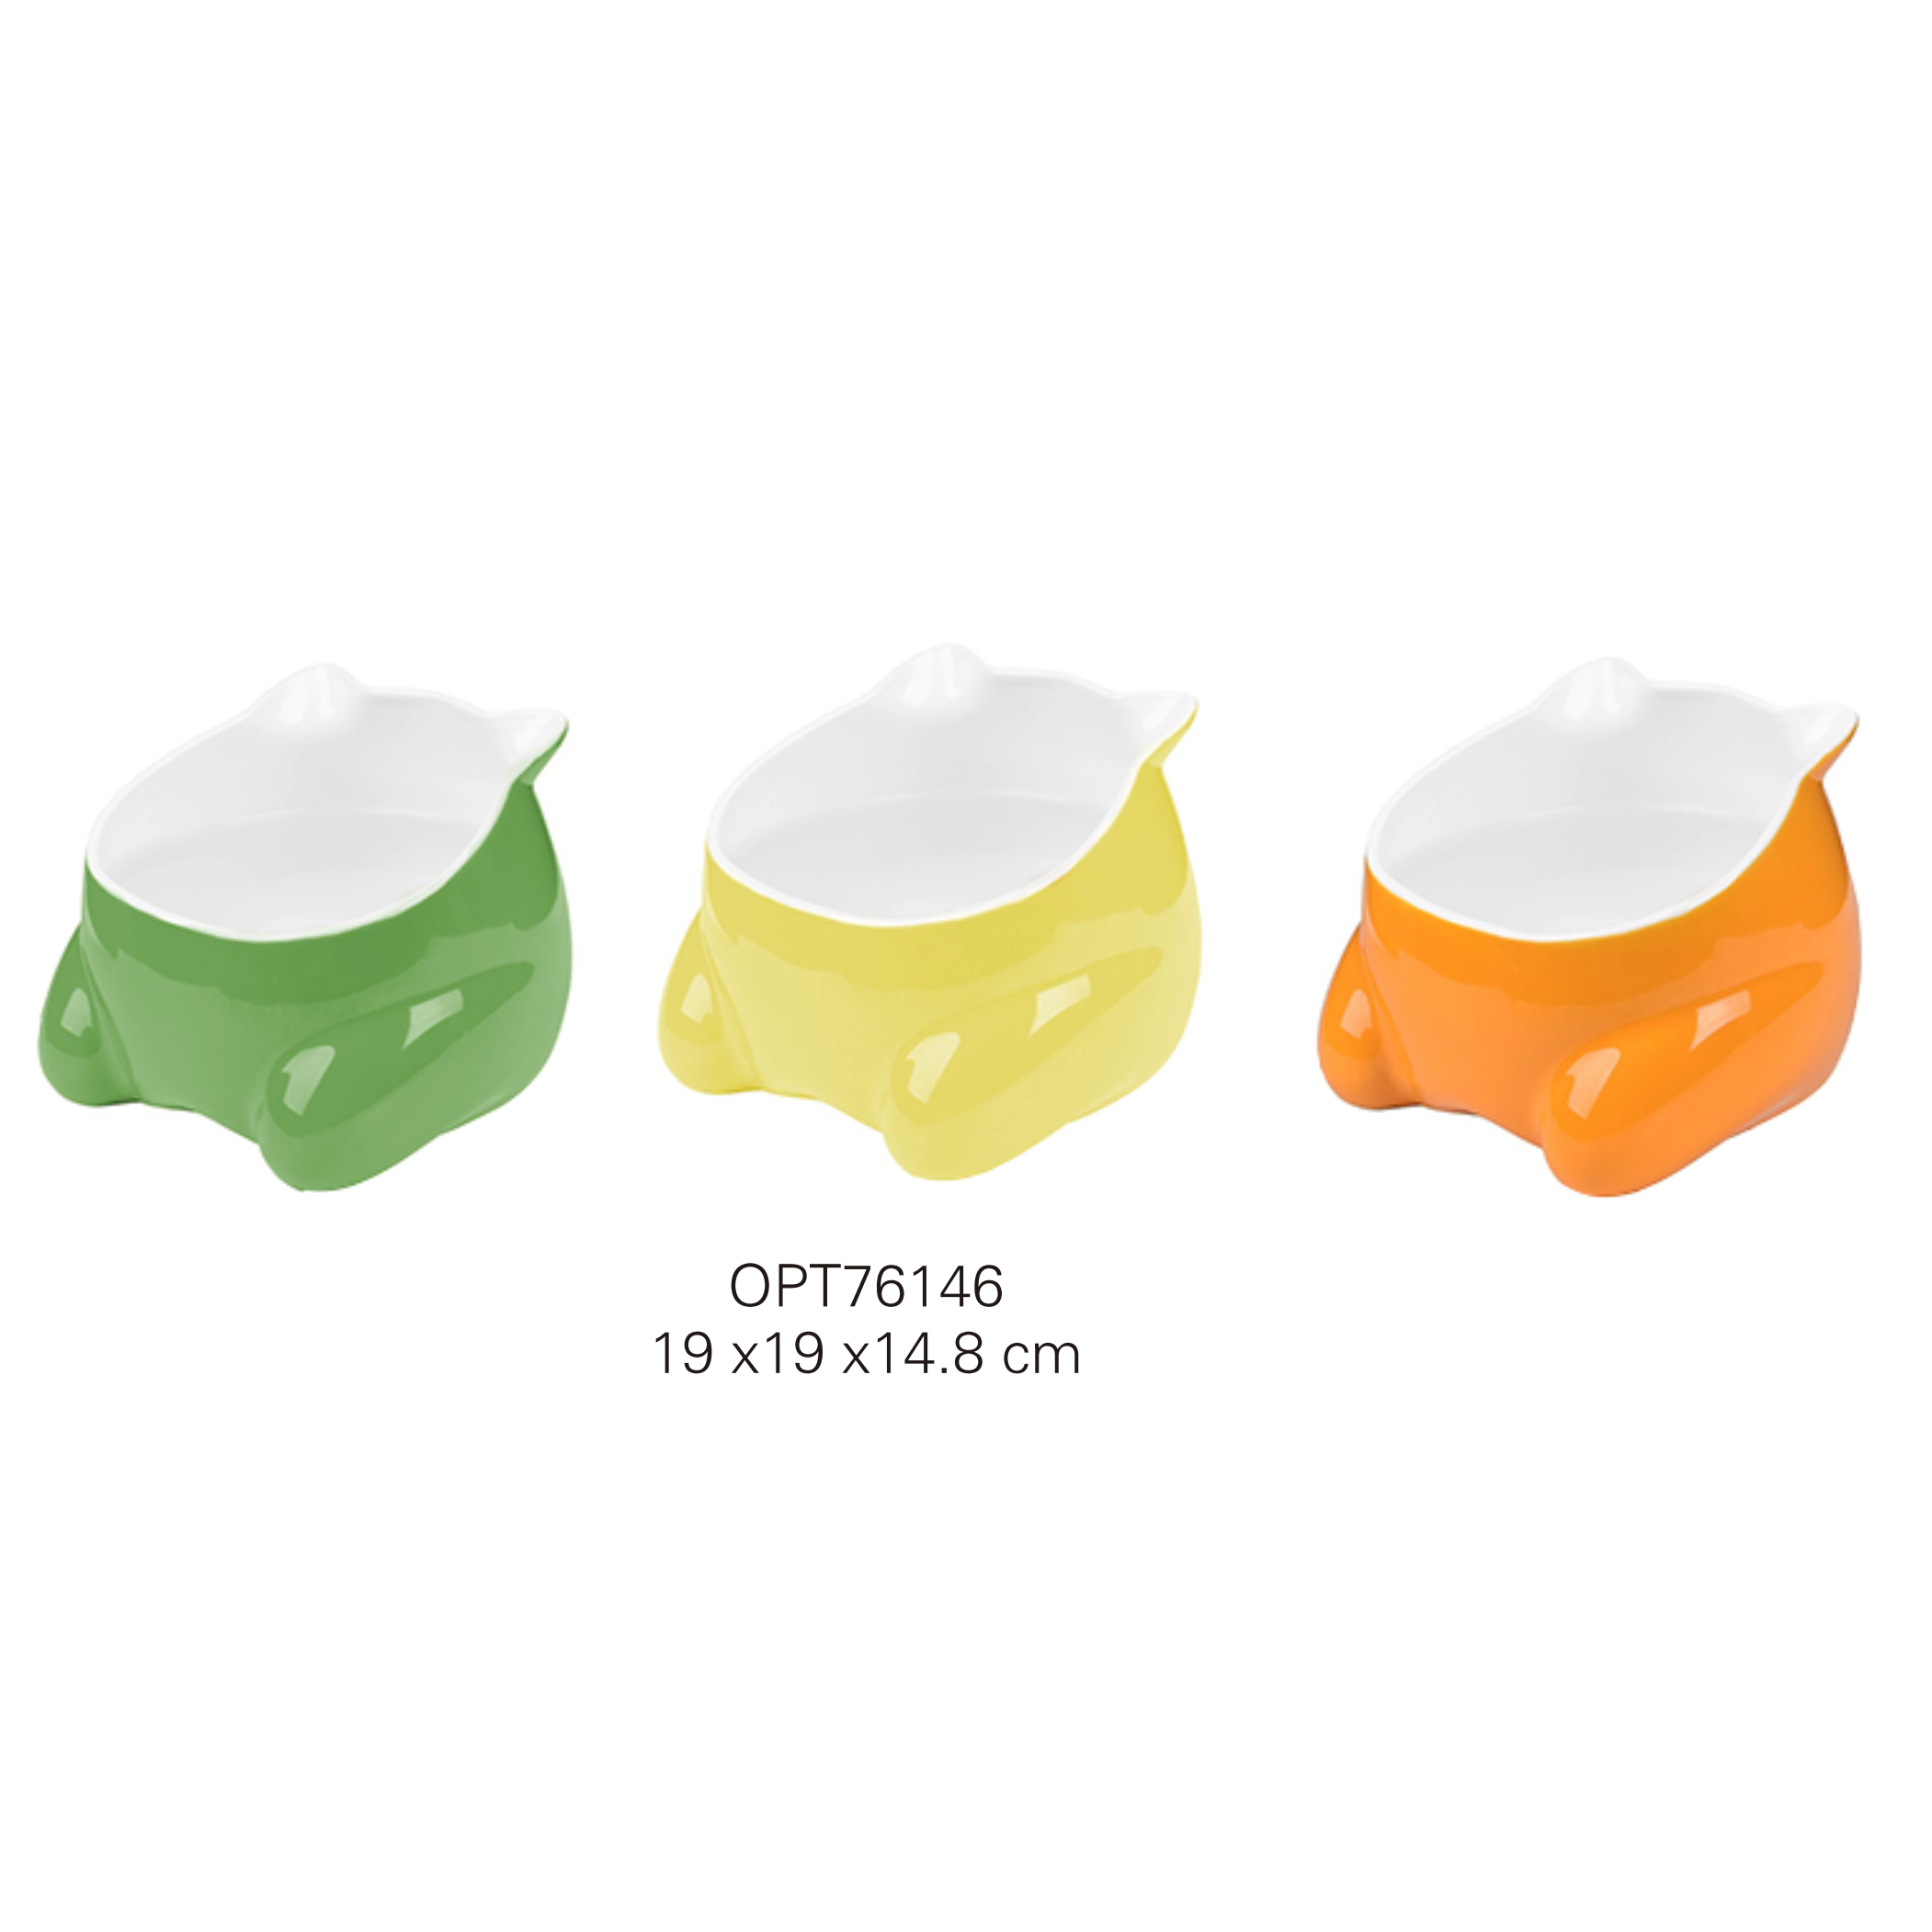 OPT76146 Fountain drinkers pet bowls